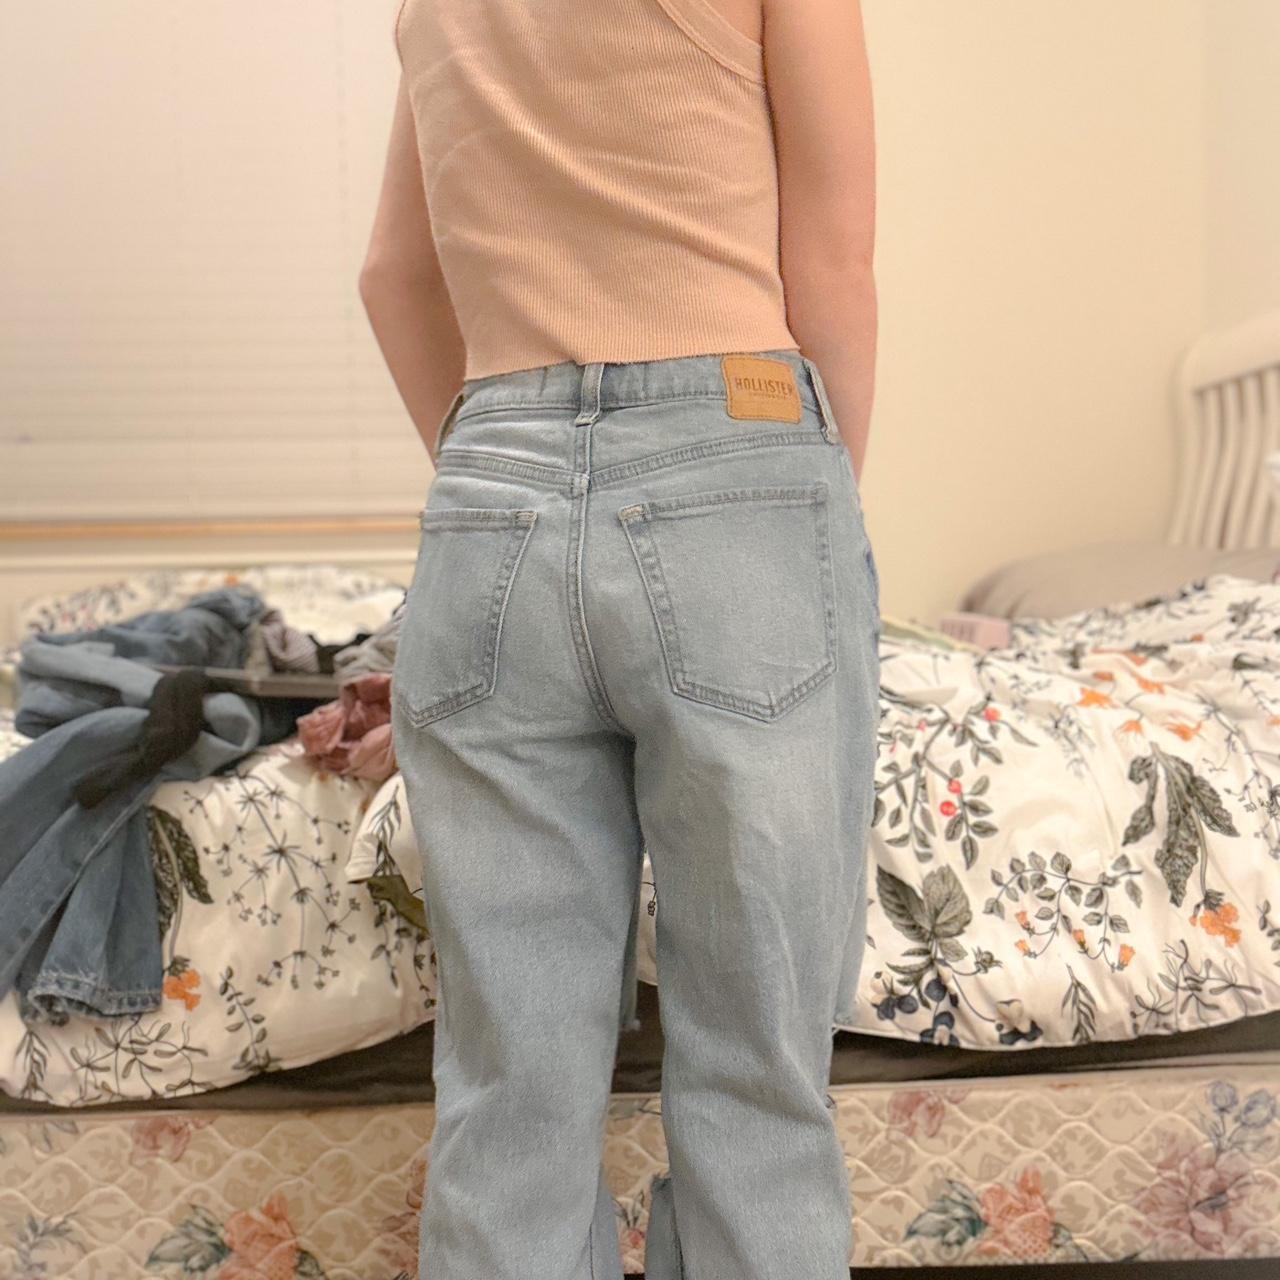 Hollister ultra high rise 90s vintage straight jeans